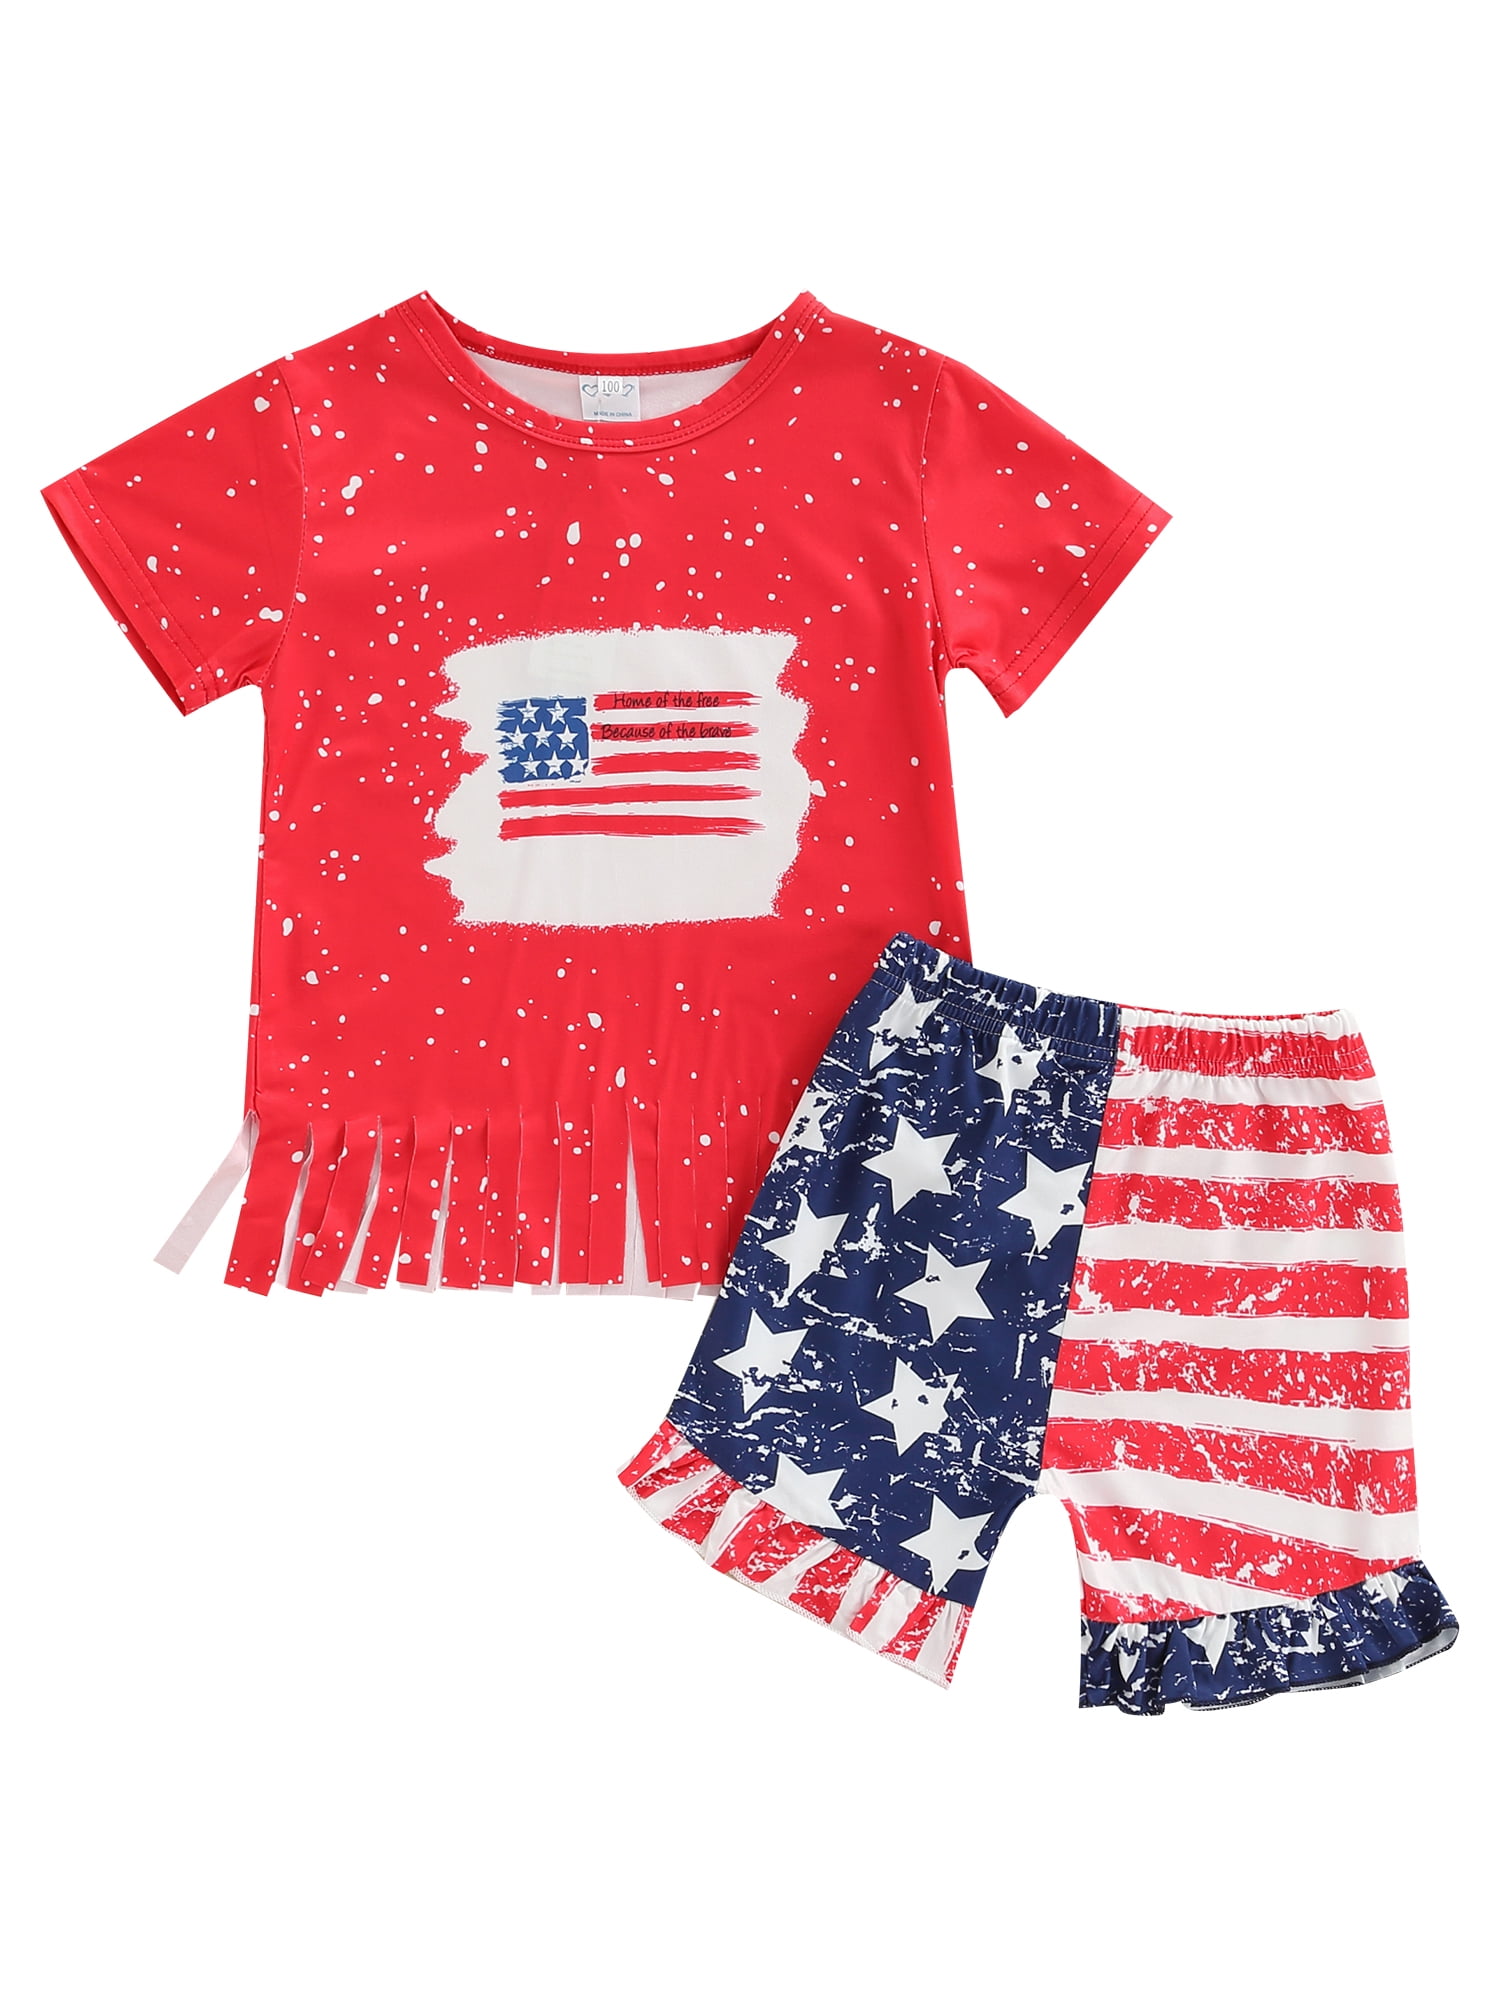 Toddler Baby 4th of July Stars and Stripe Print Patriotic Tops+Shorts Outfits 